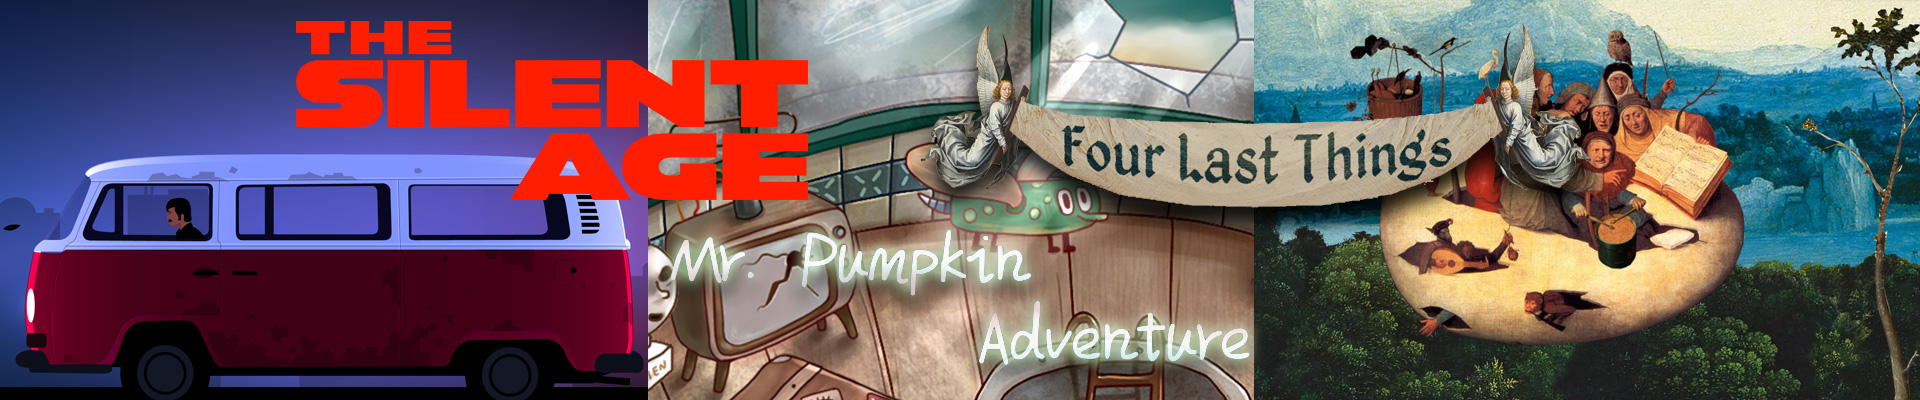 Thoughts on: The Silent Age, Mr. Pumpkin Adventure and Four Last Things